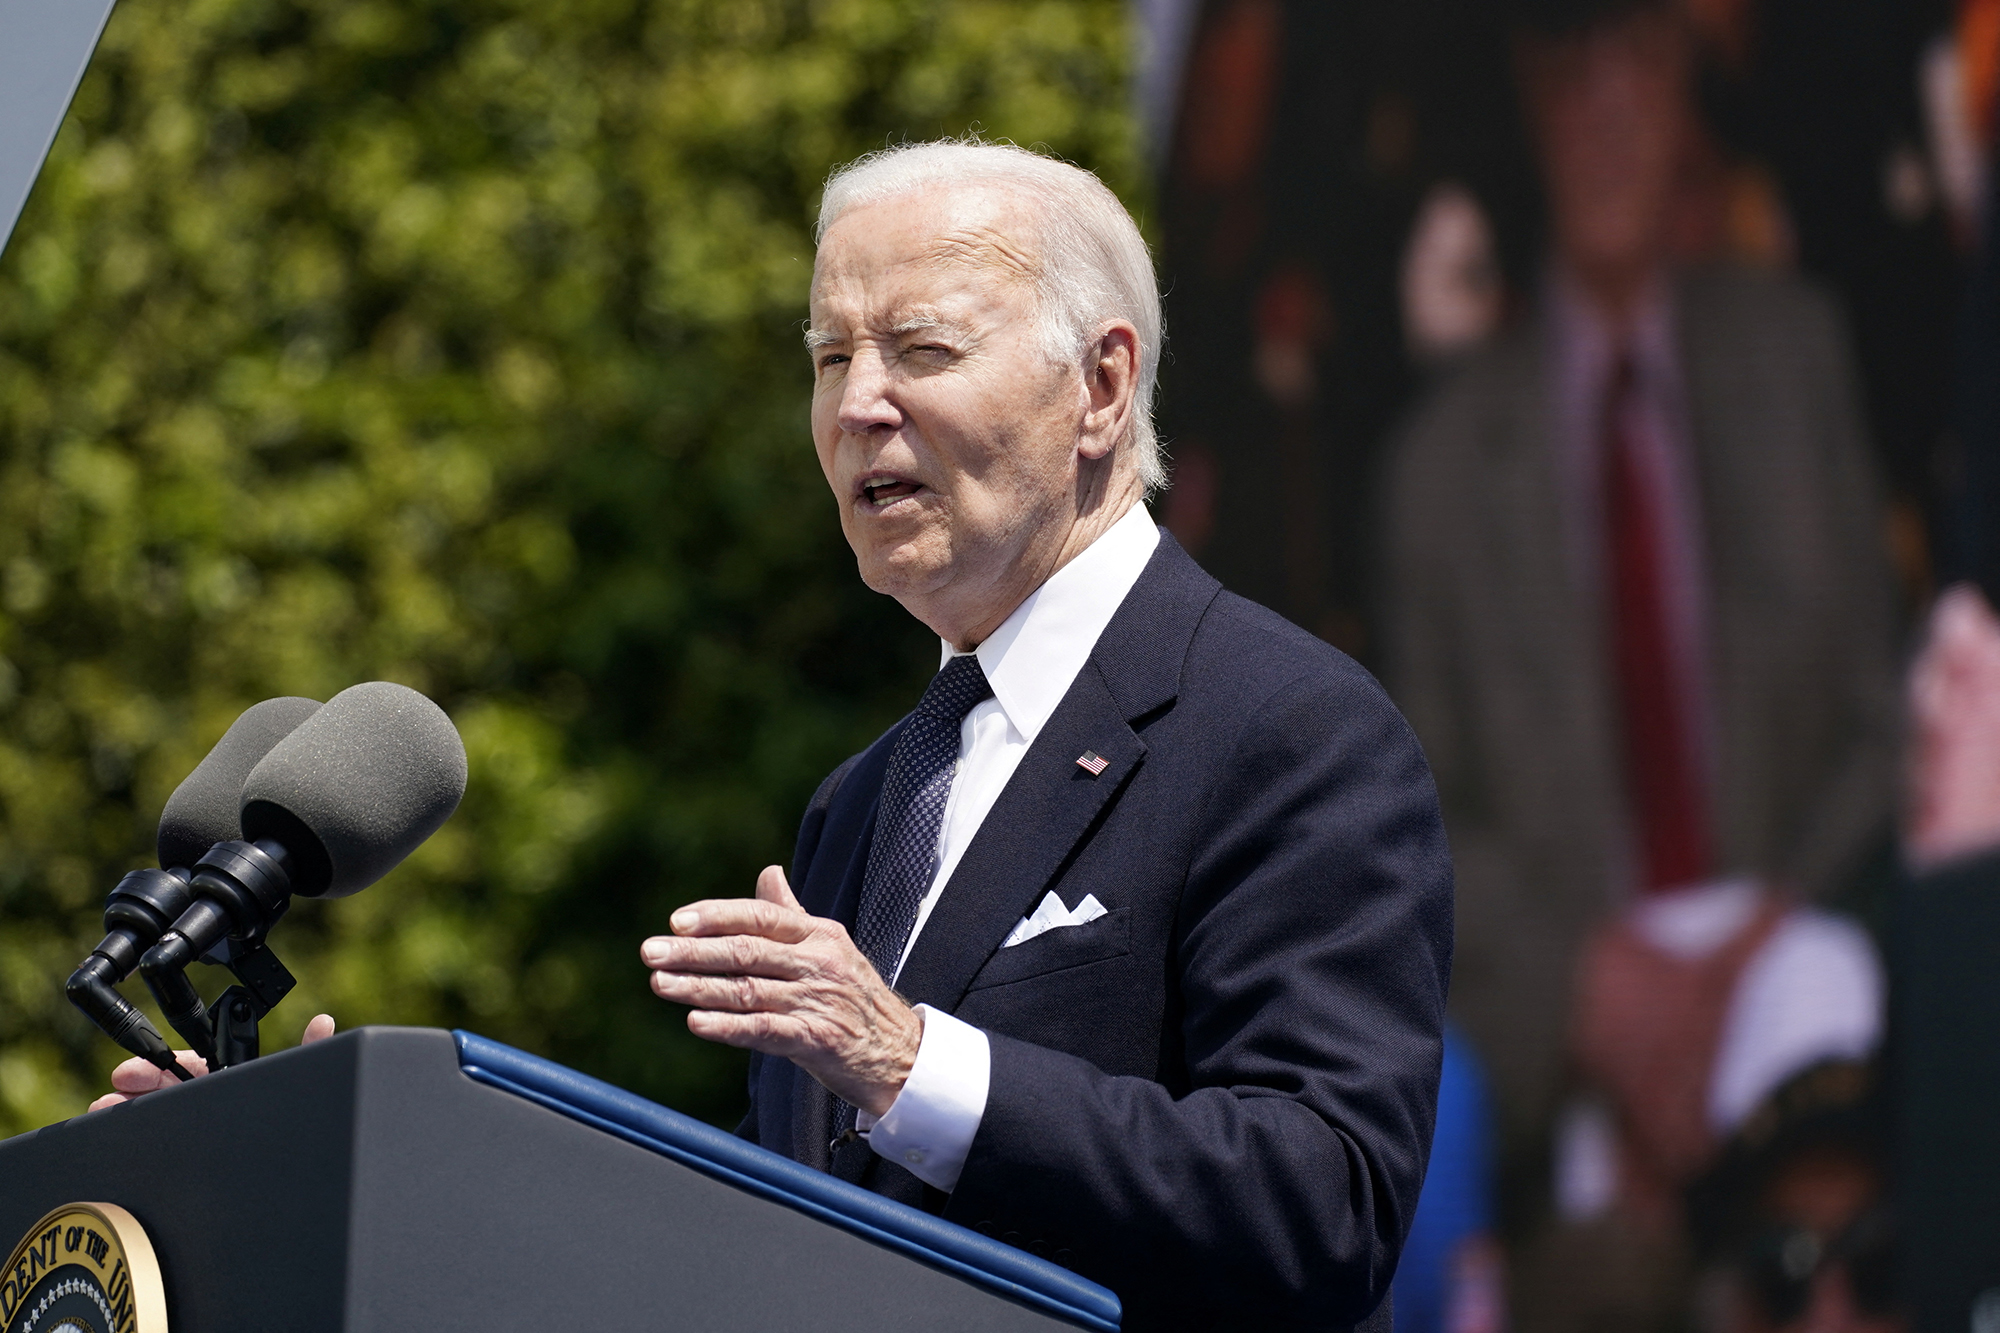 U.S President Joe Biden speaks during a ceremony to mark the 80th anniversary of D-Day at the Normandy American Cemetery and Memorial in Colleville-sur-Mer, France, on June 6.